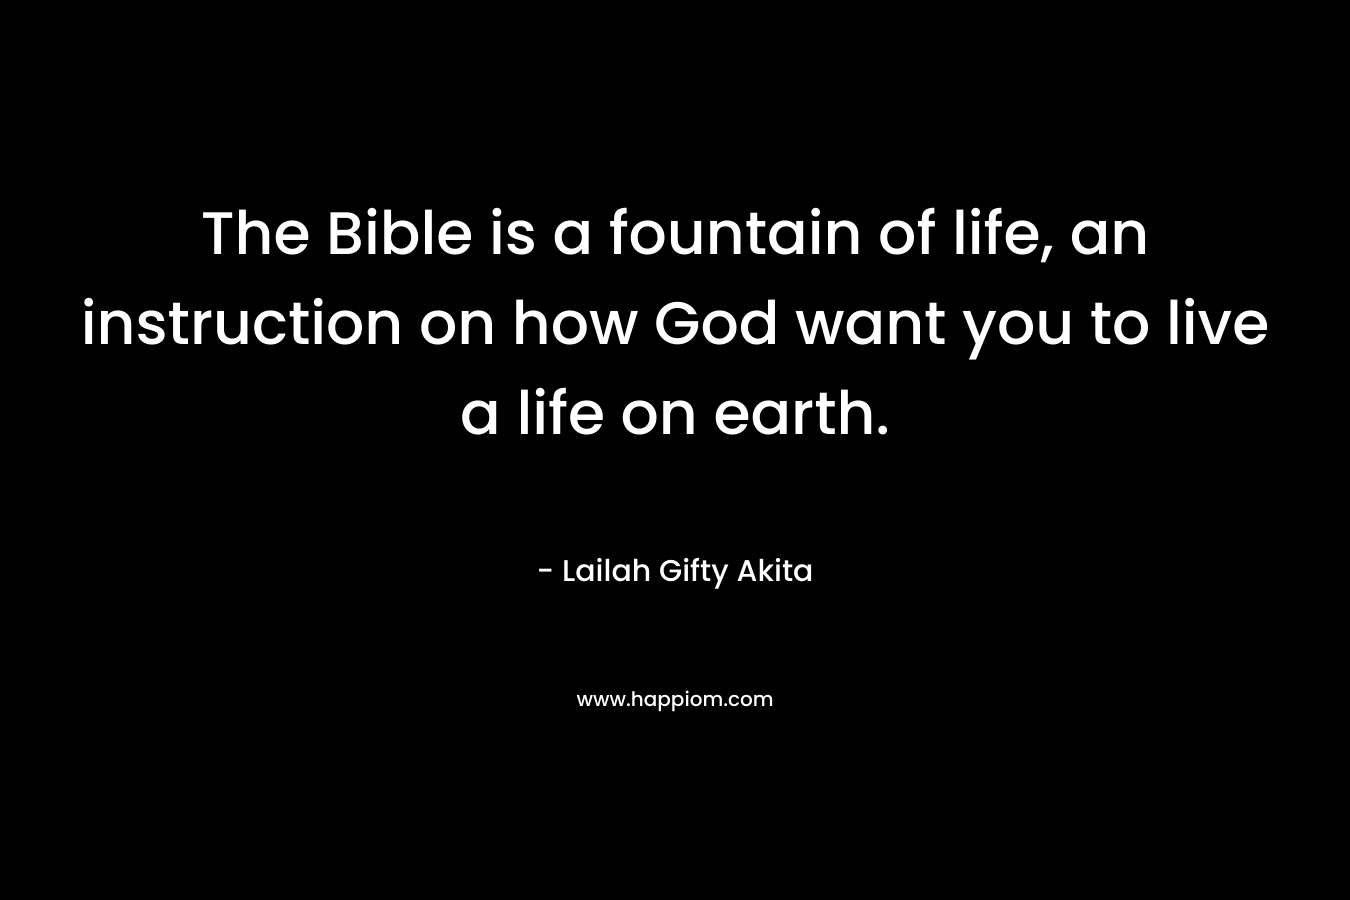 The Bible is a fountain of life, an instruction on how God want you to live a life on earth.